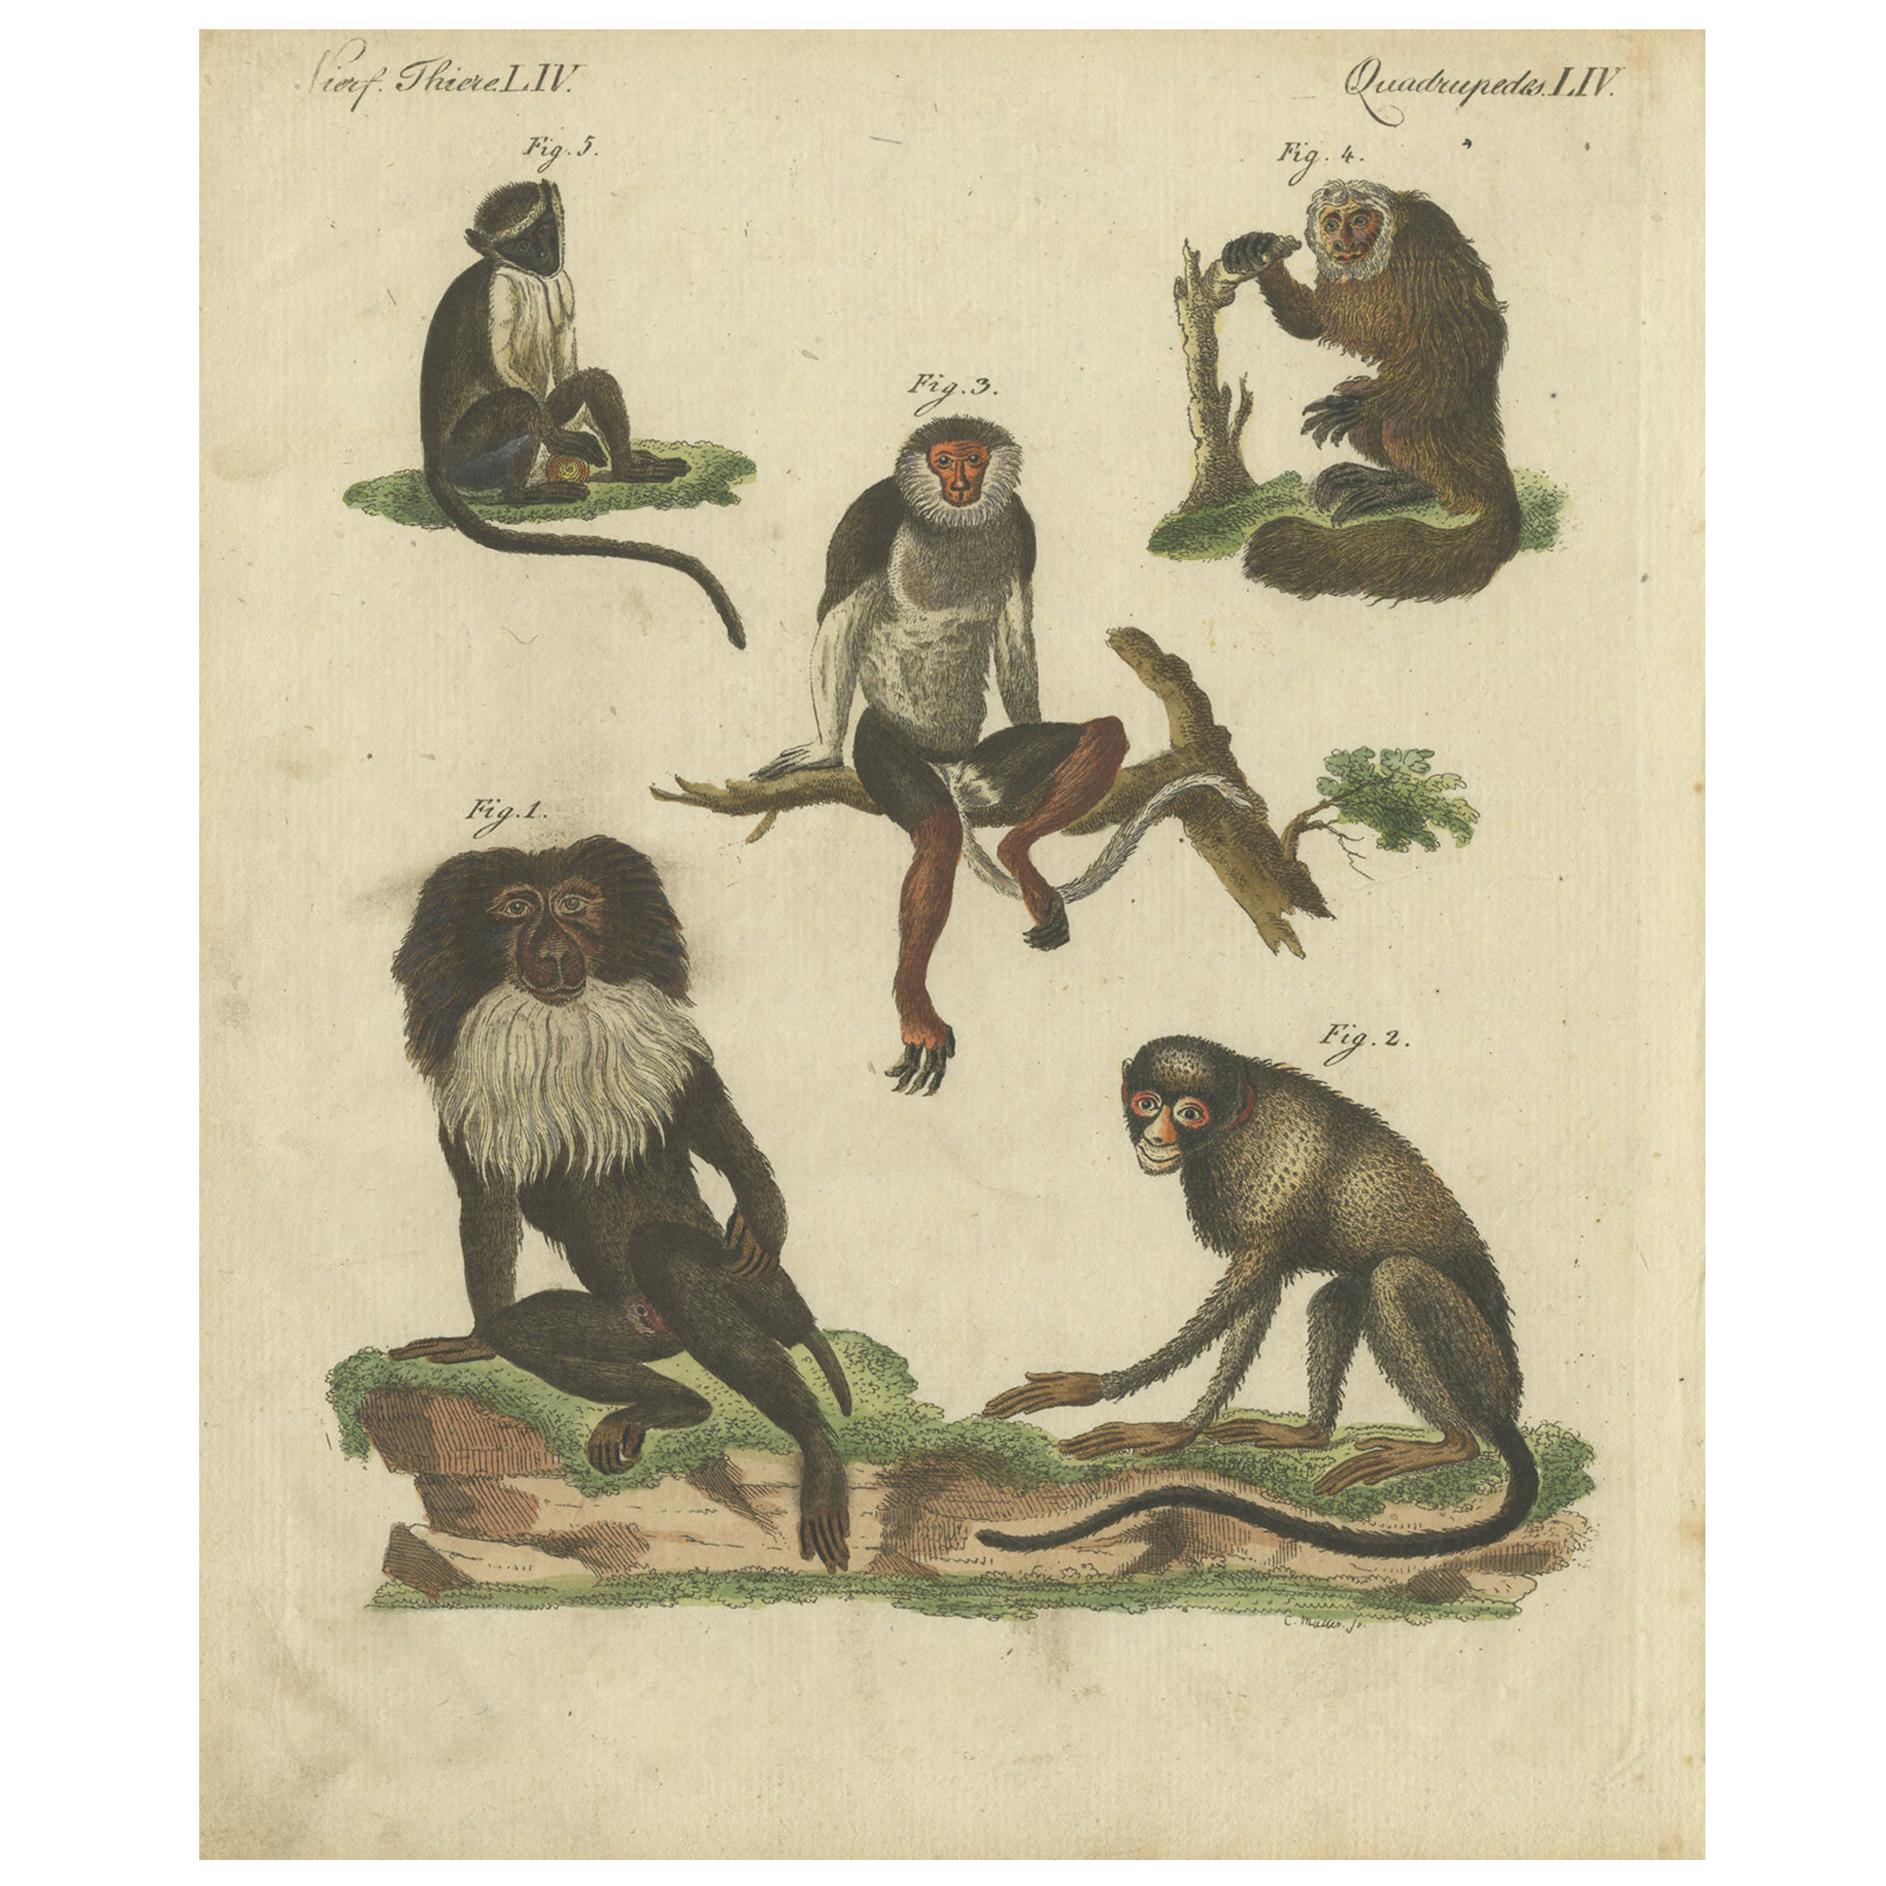 Antique Animal Handcolored Engraving of Various Monkeys by Bertuch, circa 1800